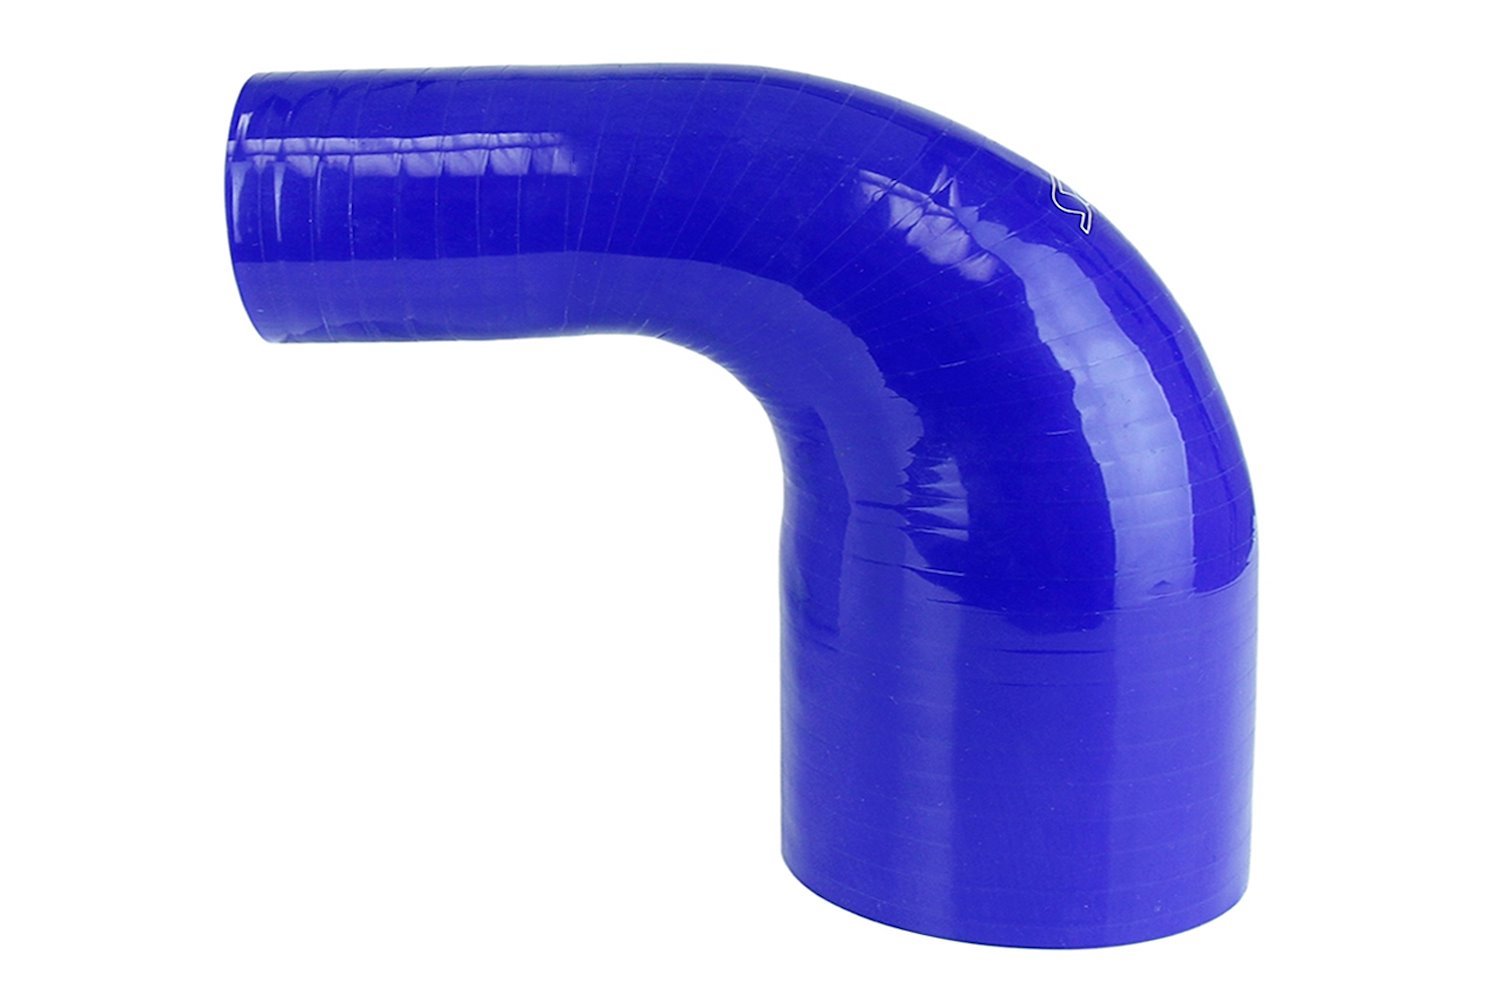 HTSER90-325-400-BLUE Silicone 90-Degree Elbow Hose, High-Temp 4-Ply Reinforced, 3-1/4 in. - 4 in. ID, Blue